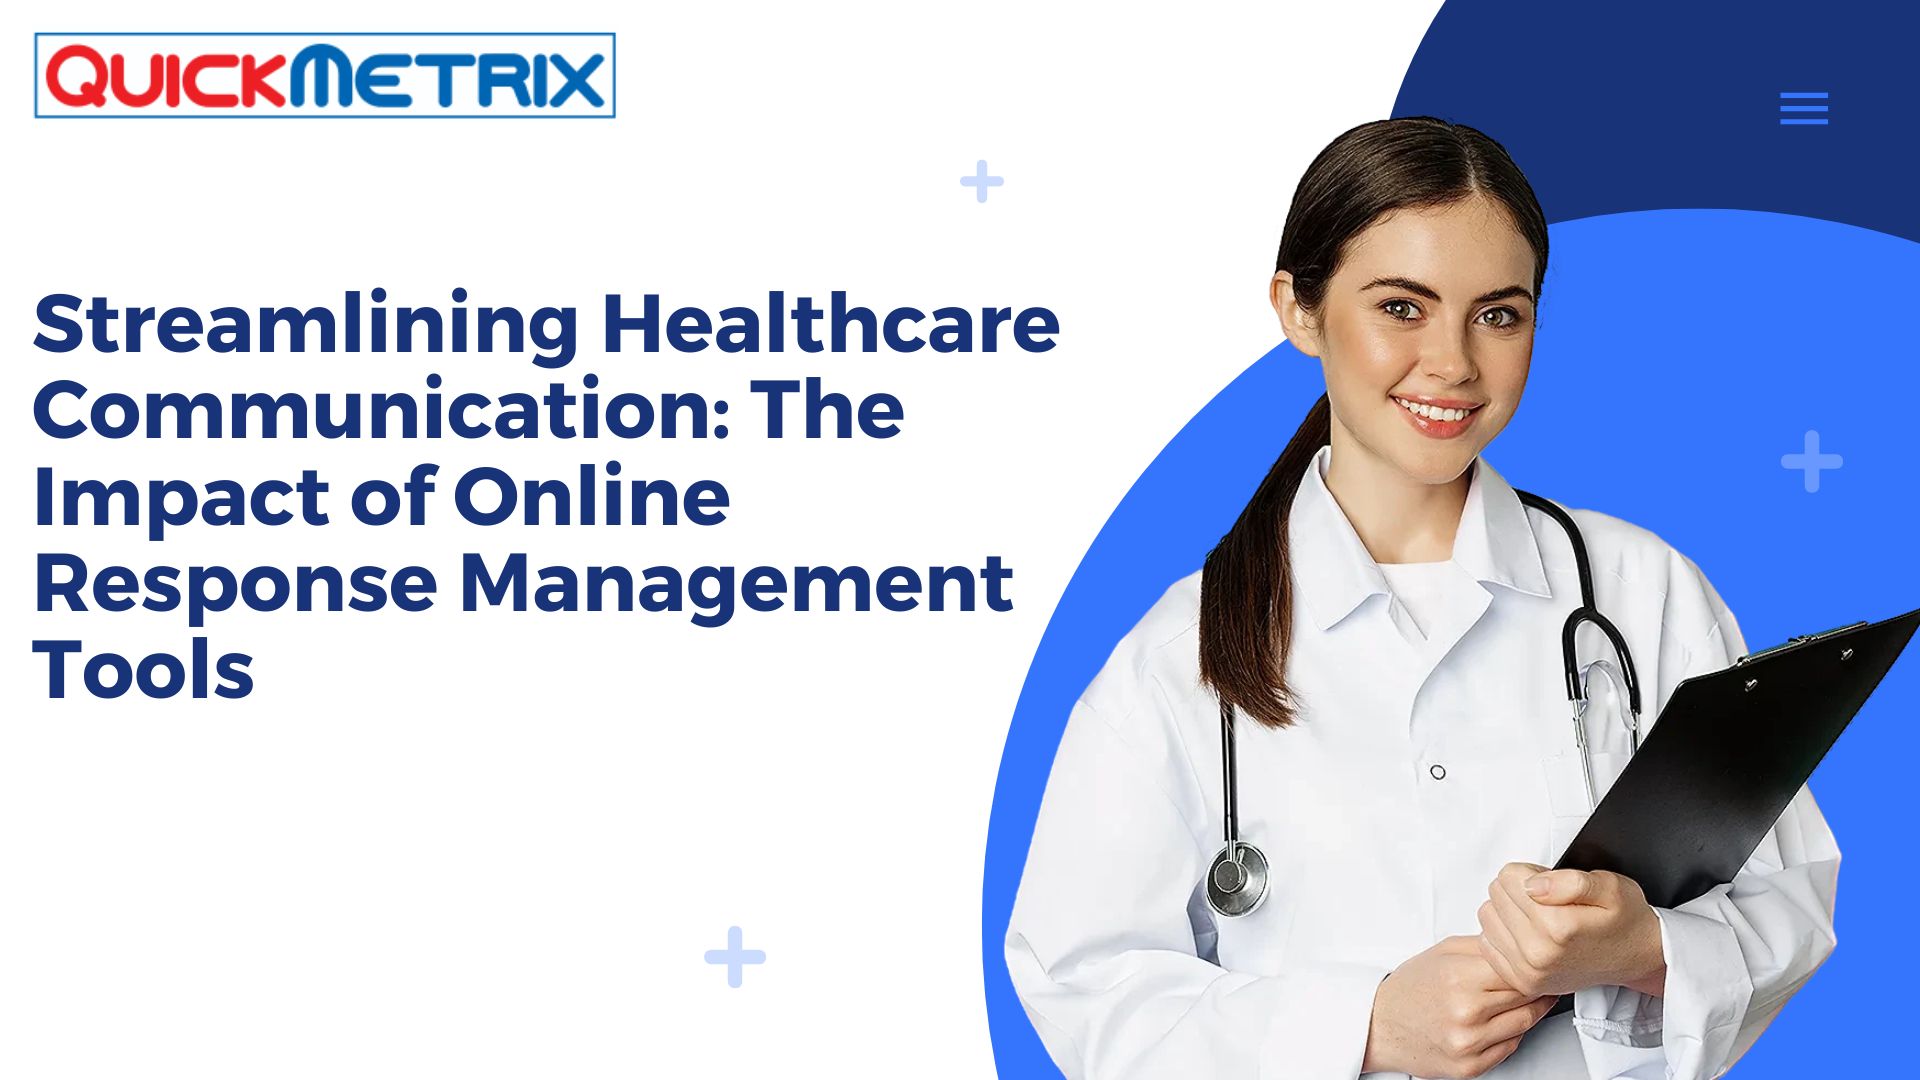 Streamlining Healthcare Communication: The Impact of Online Response Management Tools